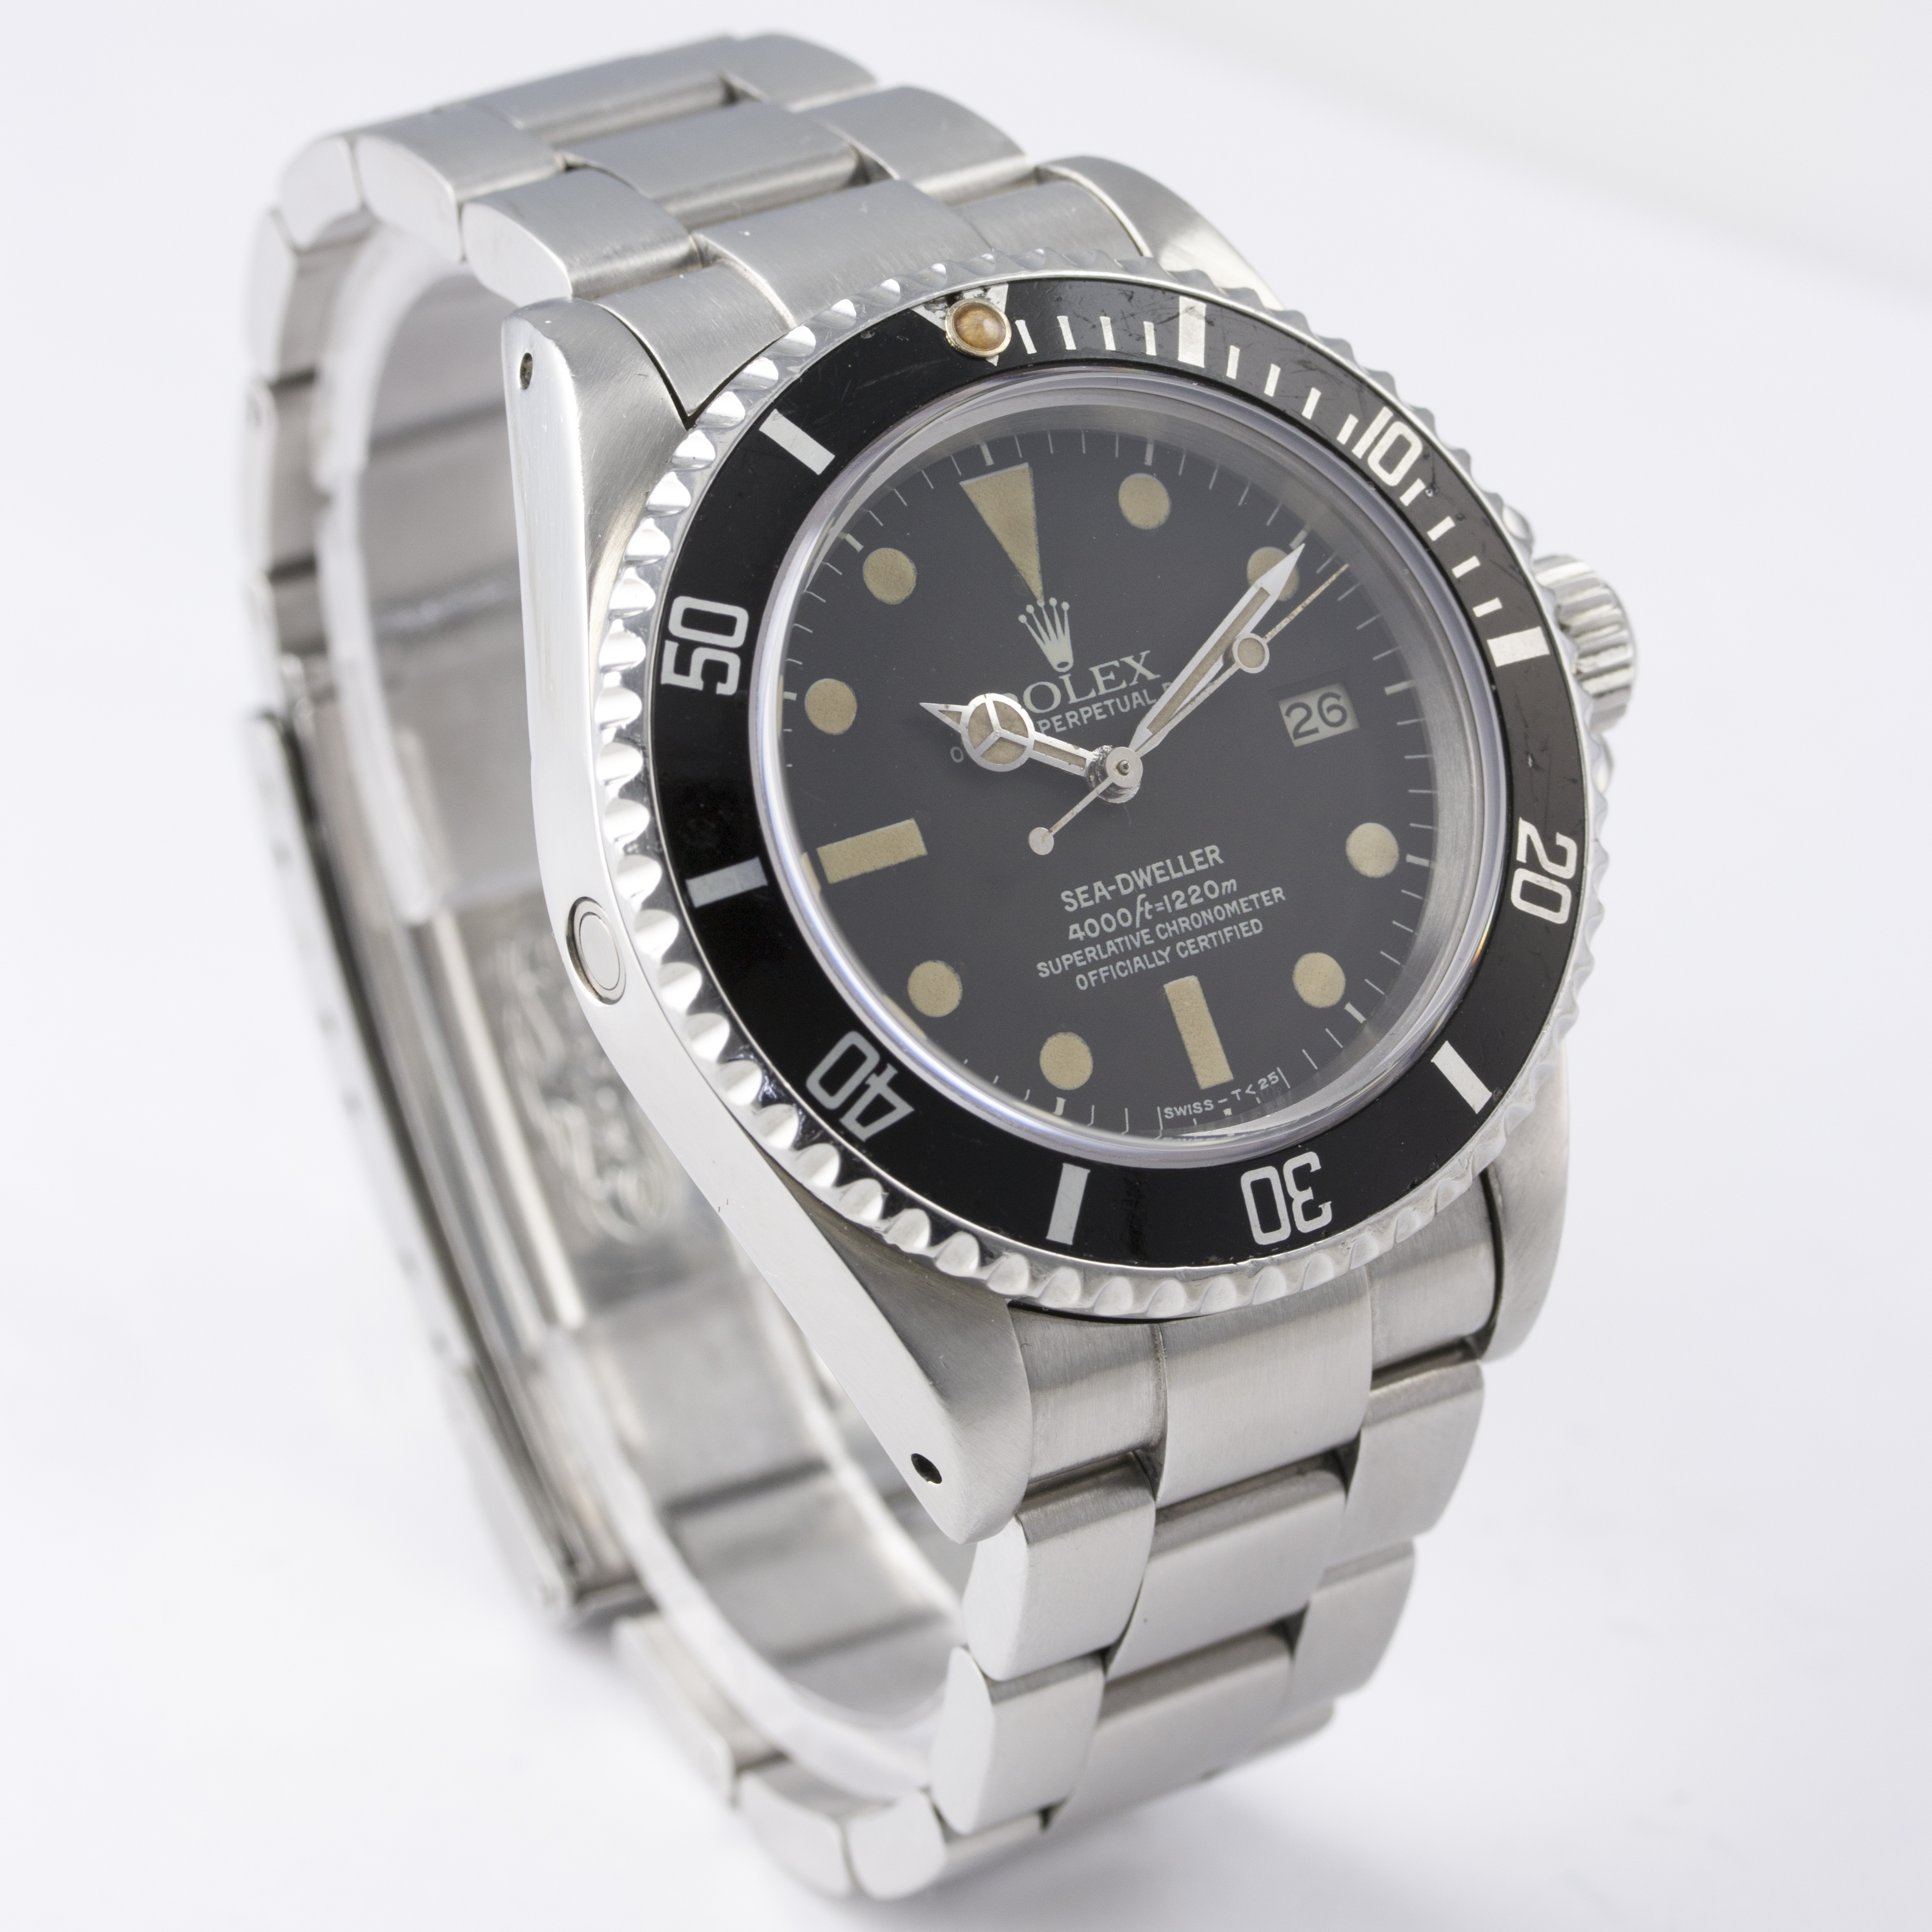 A RARE GENTLEMAN'S STAINLESS STEEL ROLEX OYSTER PERPETUAL DATE SEA DWELLER BRACELET WATCH CIRCA - Image 6 of 8